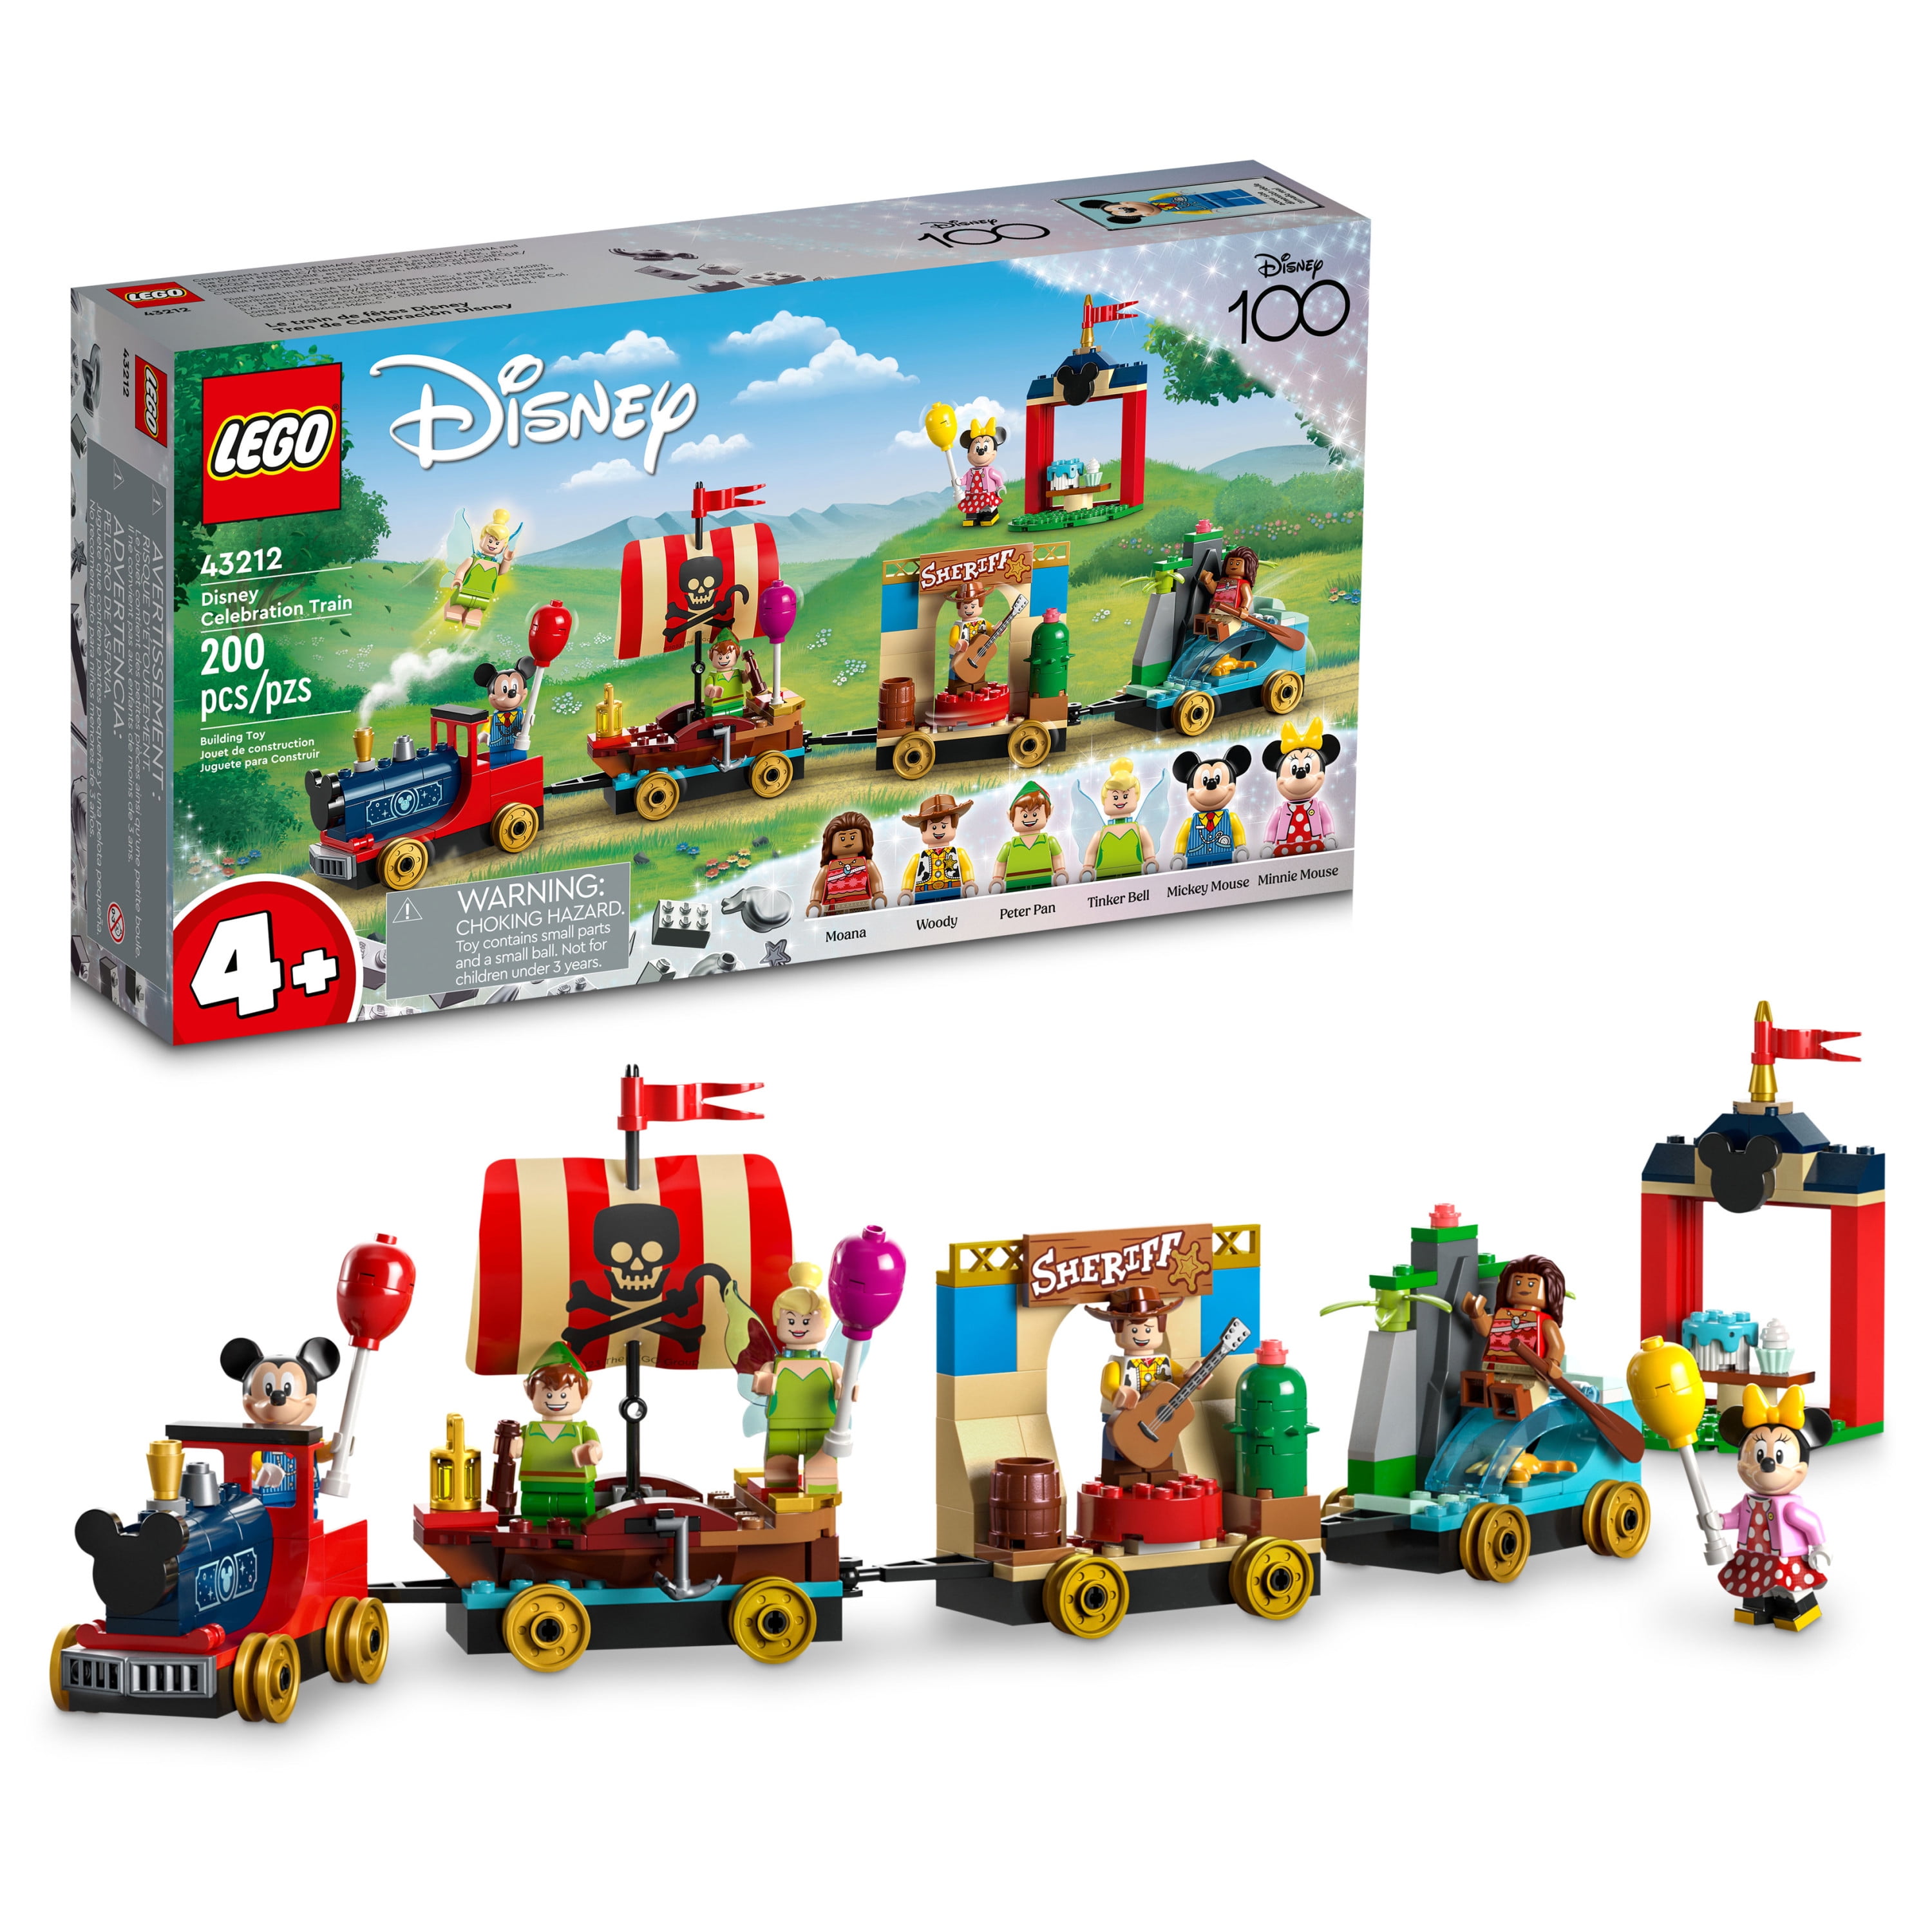 LEGO Disney 100 Celebration Train 43212 Building Play, Fun Birthday Gift for Kids Ages 4+, 6 Disney Minifigures: Moana, Woody, Peter Pan, Tinker Bell, Mickey & Minnie Mouse -